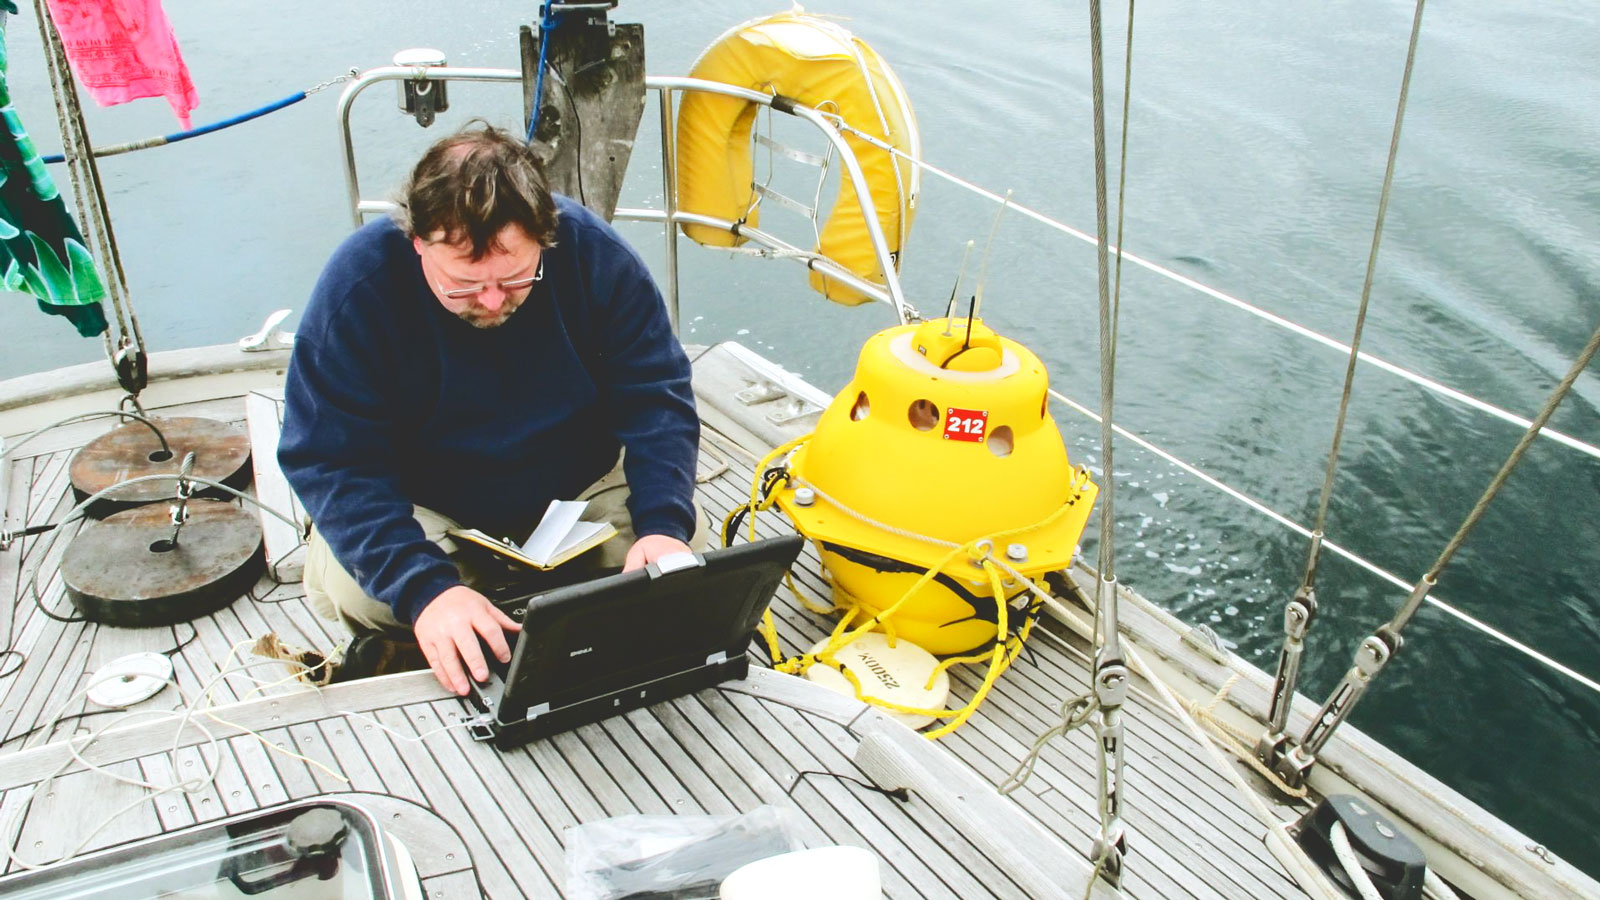 A man setting up marine audio recording equipment on a laptop on a boat.